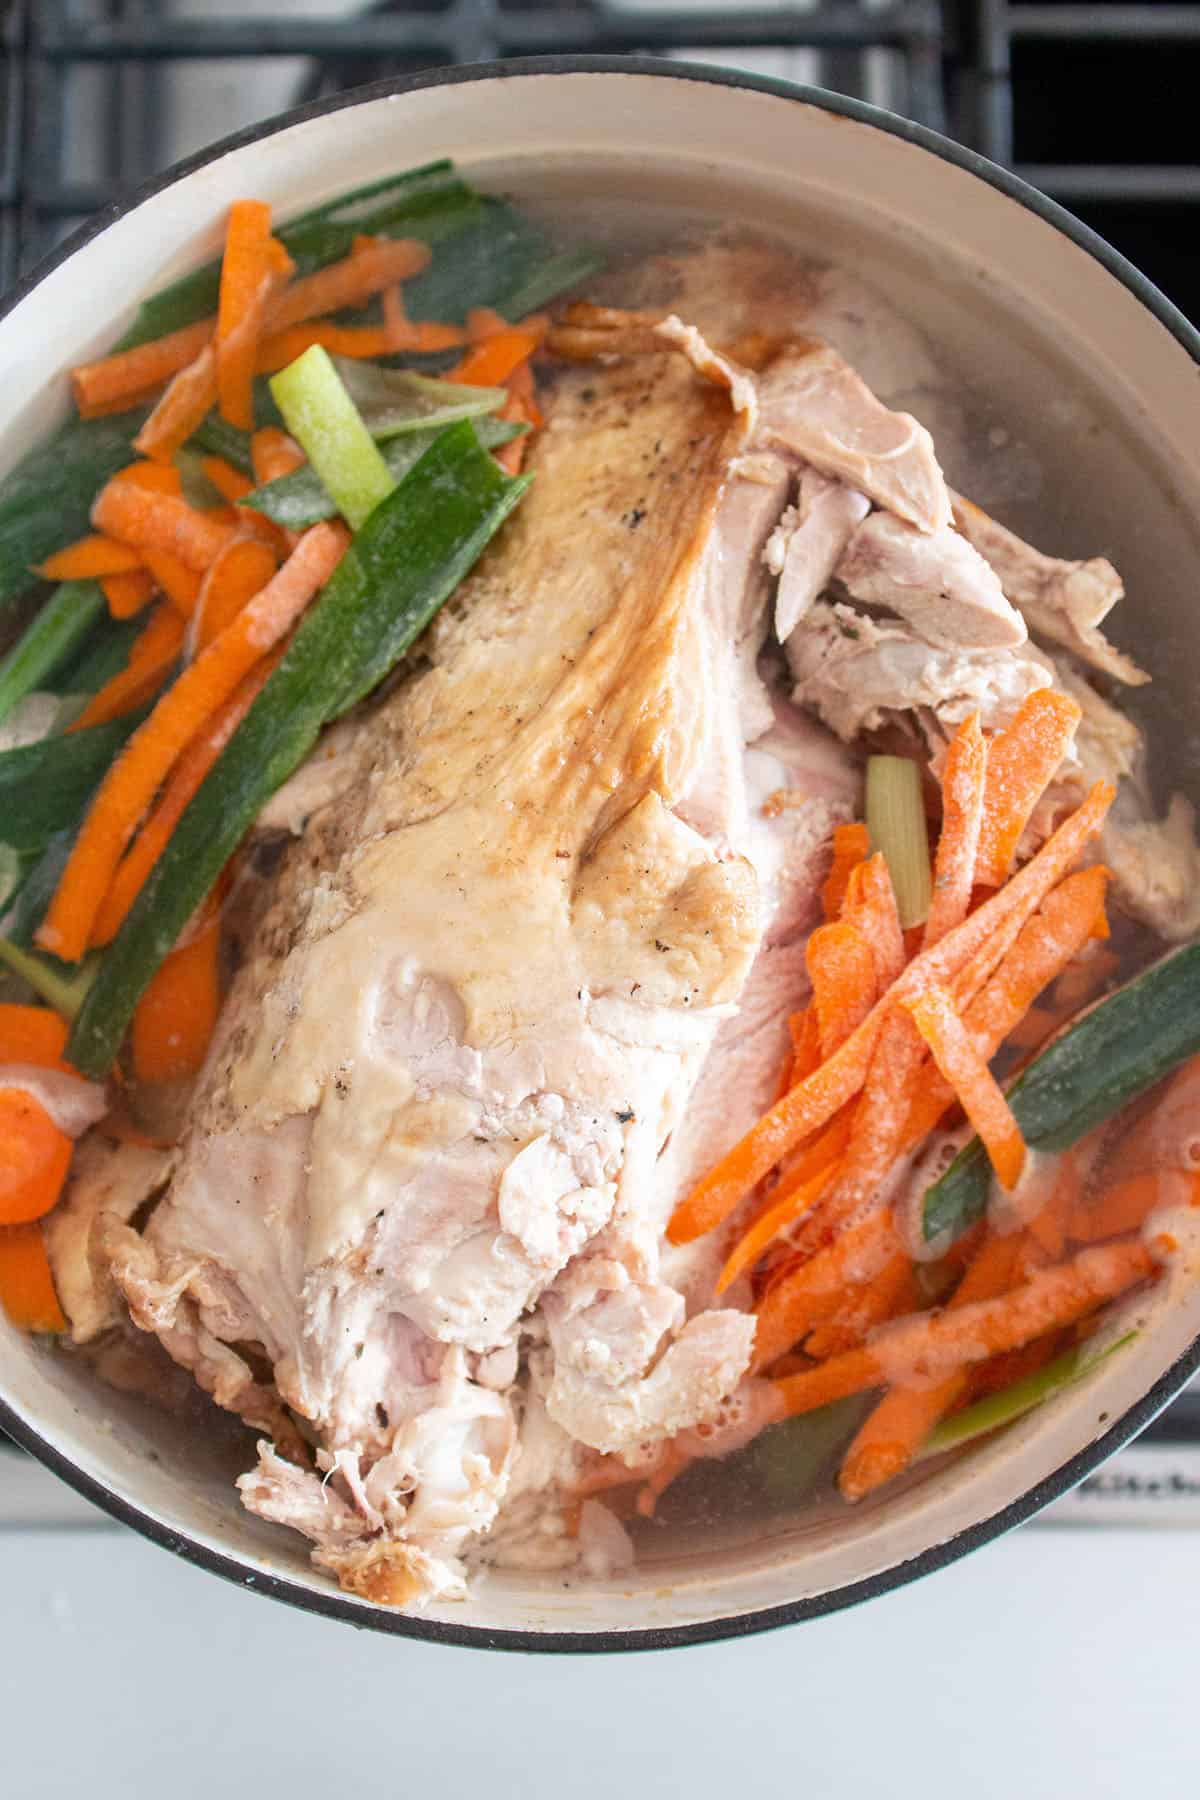 Large Dutch Oven on the stove with a turkey carcass, veggies scraps and water.